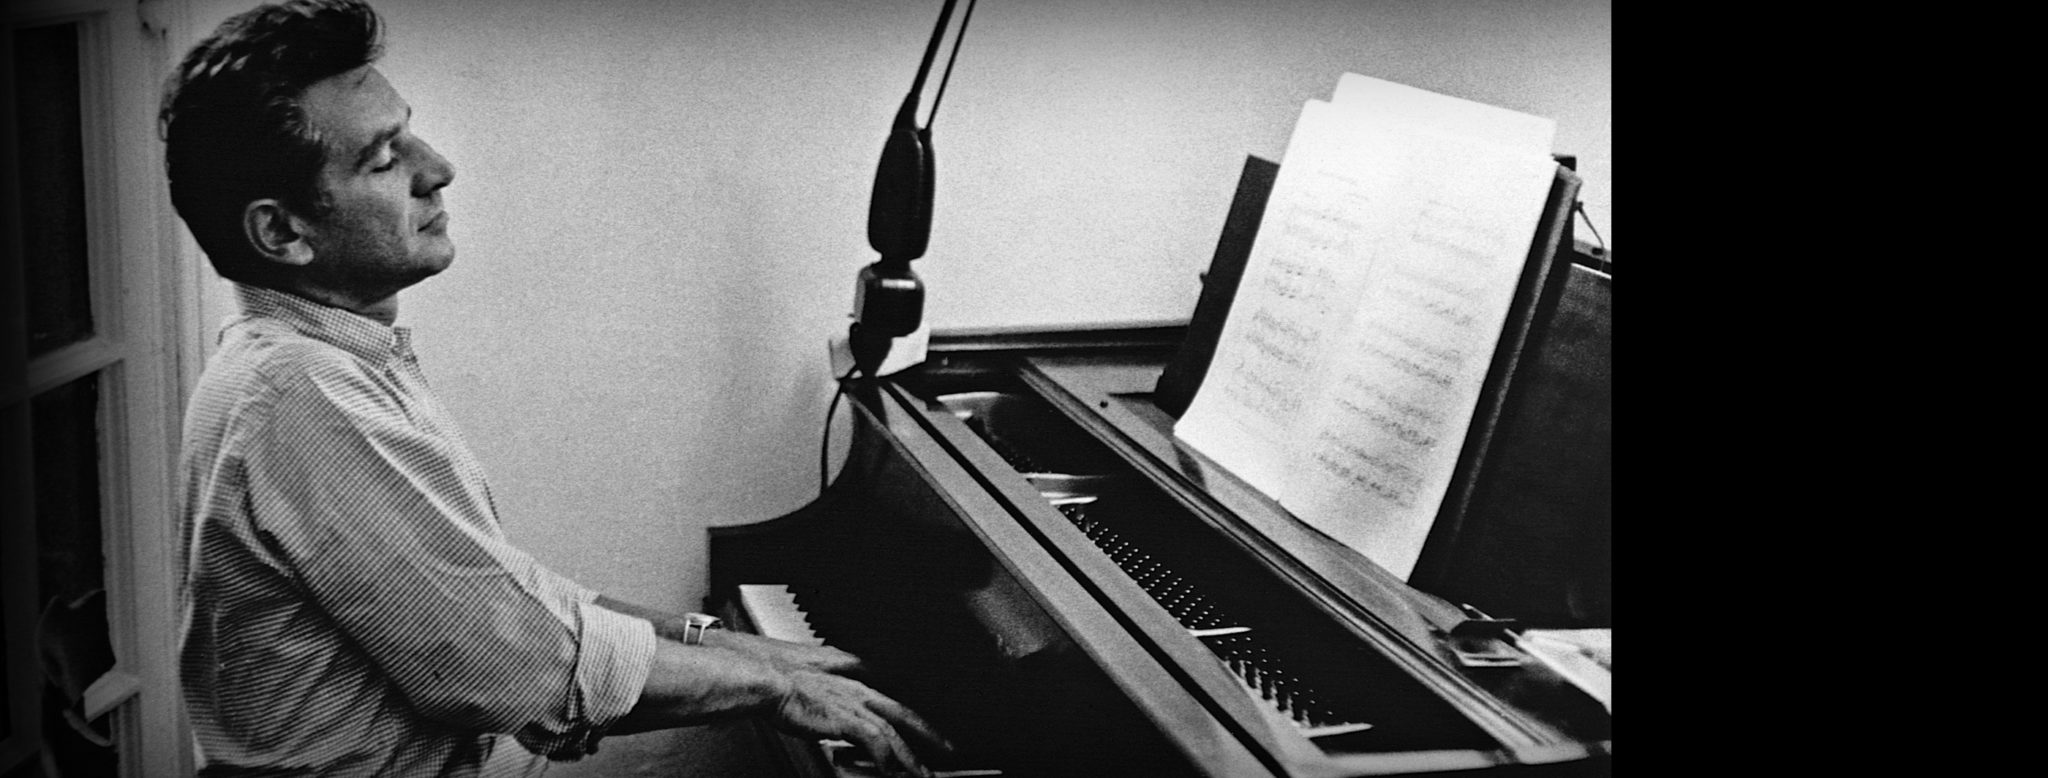 Leonard Bernstein (1918-1990) works at his piano. Bernstein was a prolific composer, best known for musicals such as "West Side Story." He also conducted the New York Philharmonic Symphony from 1957 until his death, and was primarily responsible for bringing the music of Gustav Mahler to a greater public audience in the United States. / Credit: © CORBIS/Corbis via Getty Images